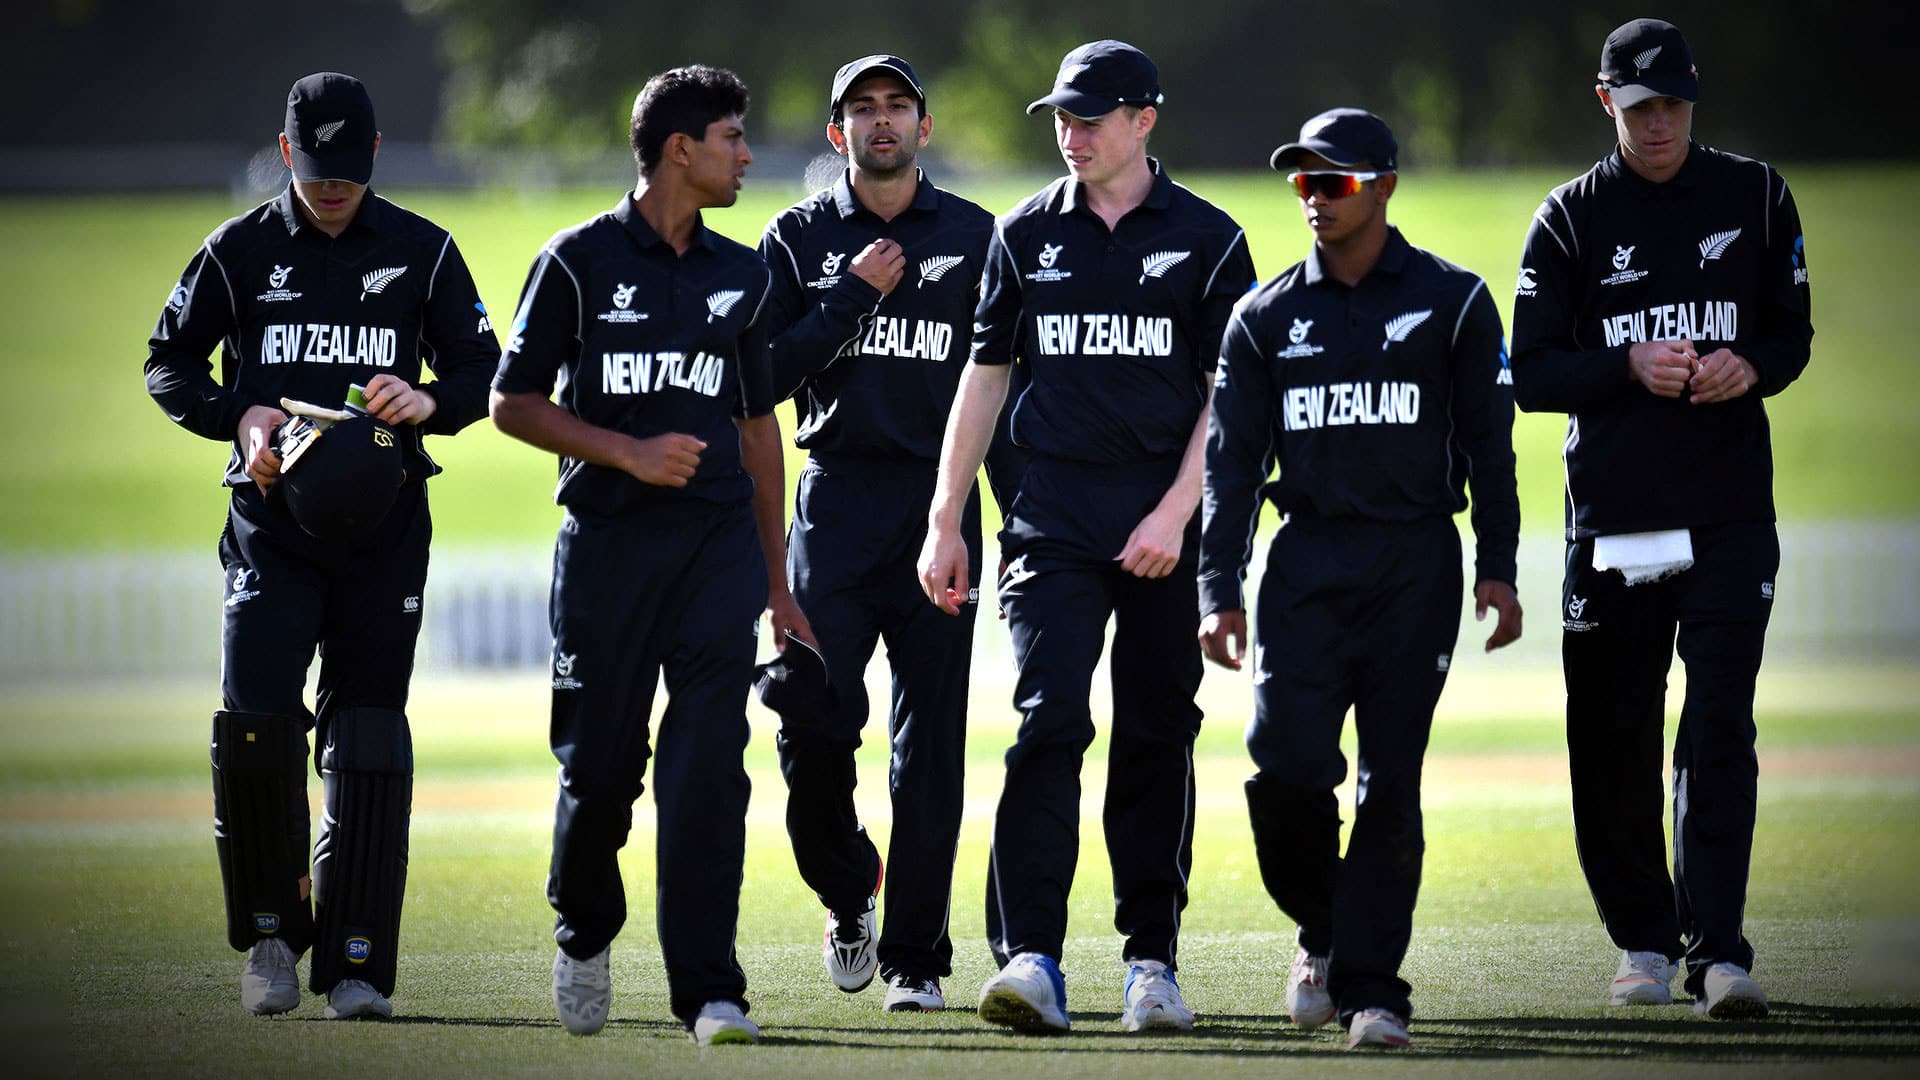 Cricket Fraternity Reacts to New Zealand's ''Spirit of Cricket" Act in